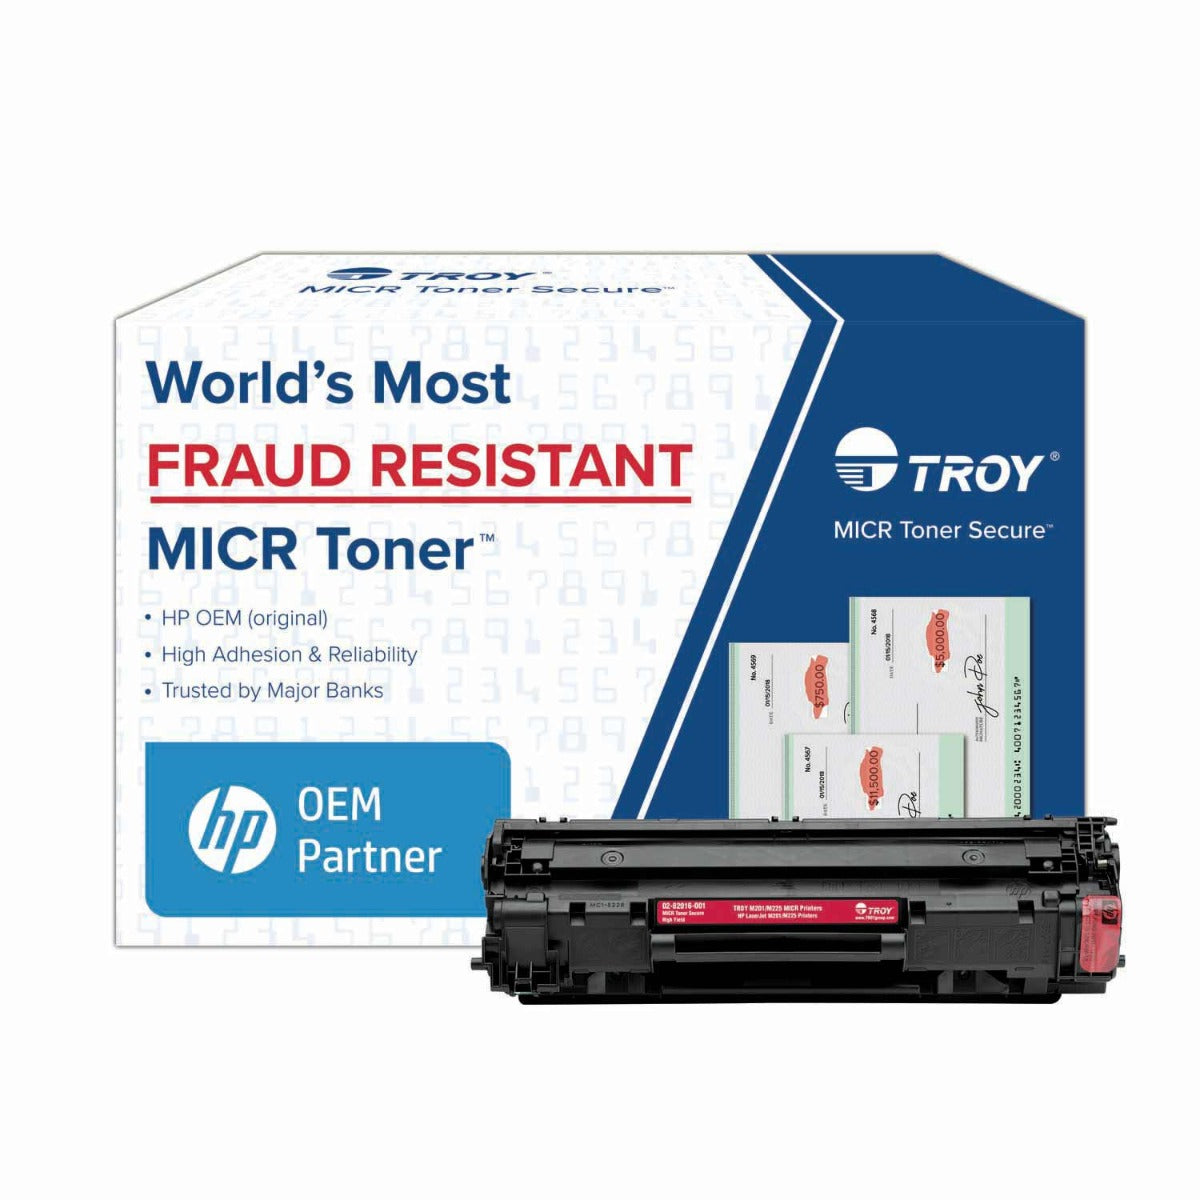 TROY M201/M225 MICR Toner Secure High Yield Cartridge (Coordinating HP Part Number: CF283X)